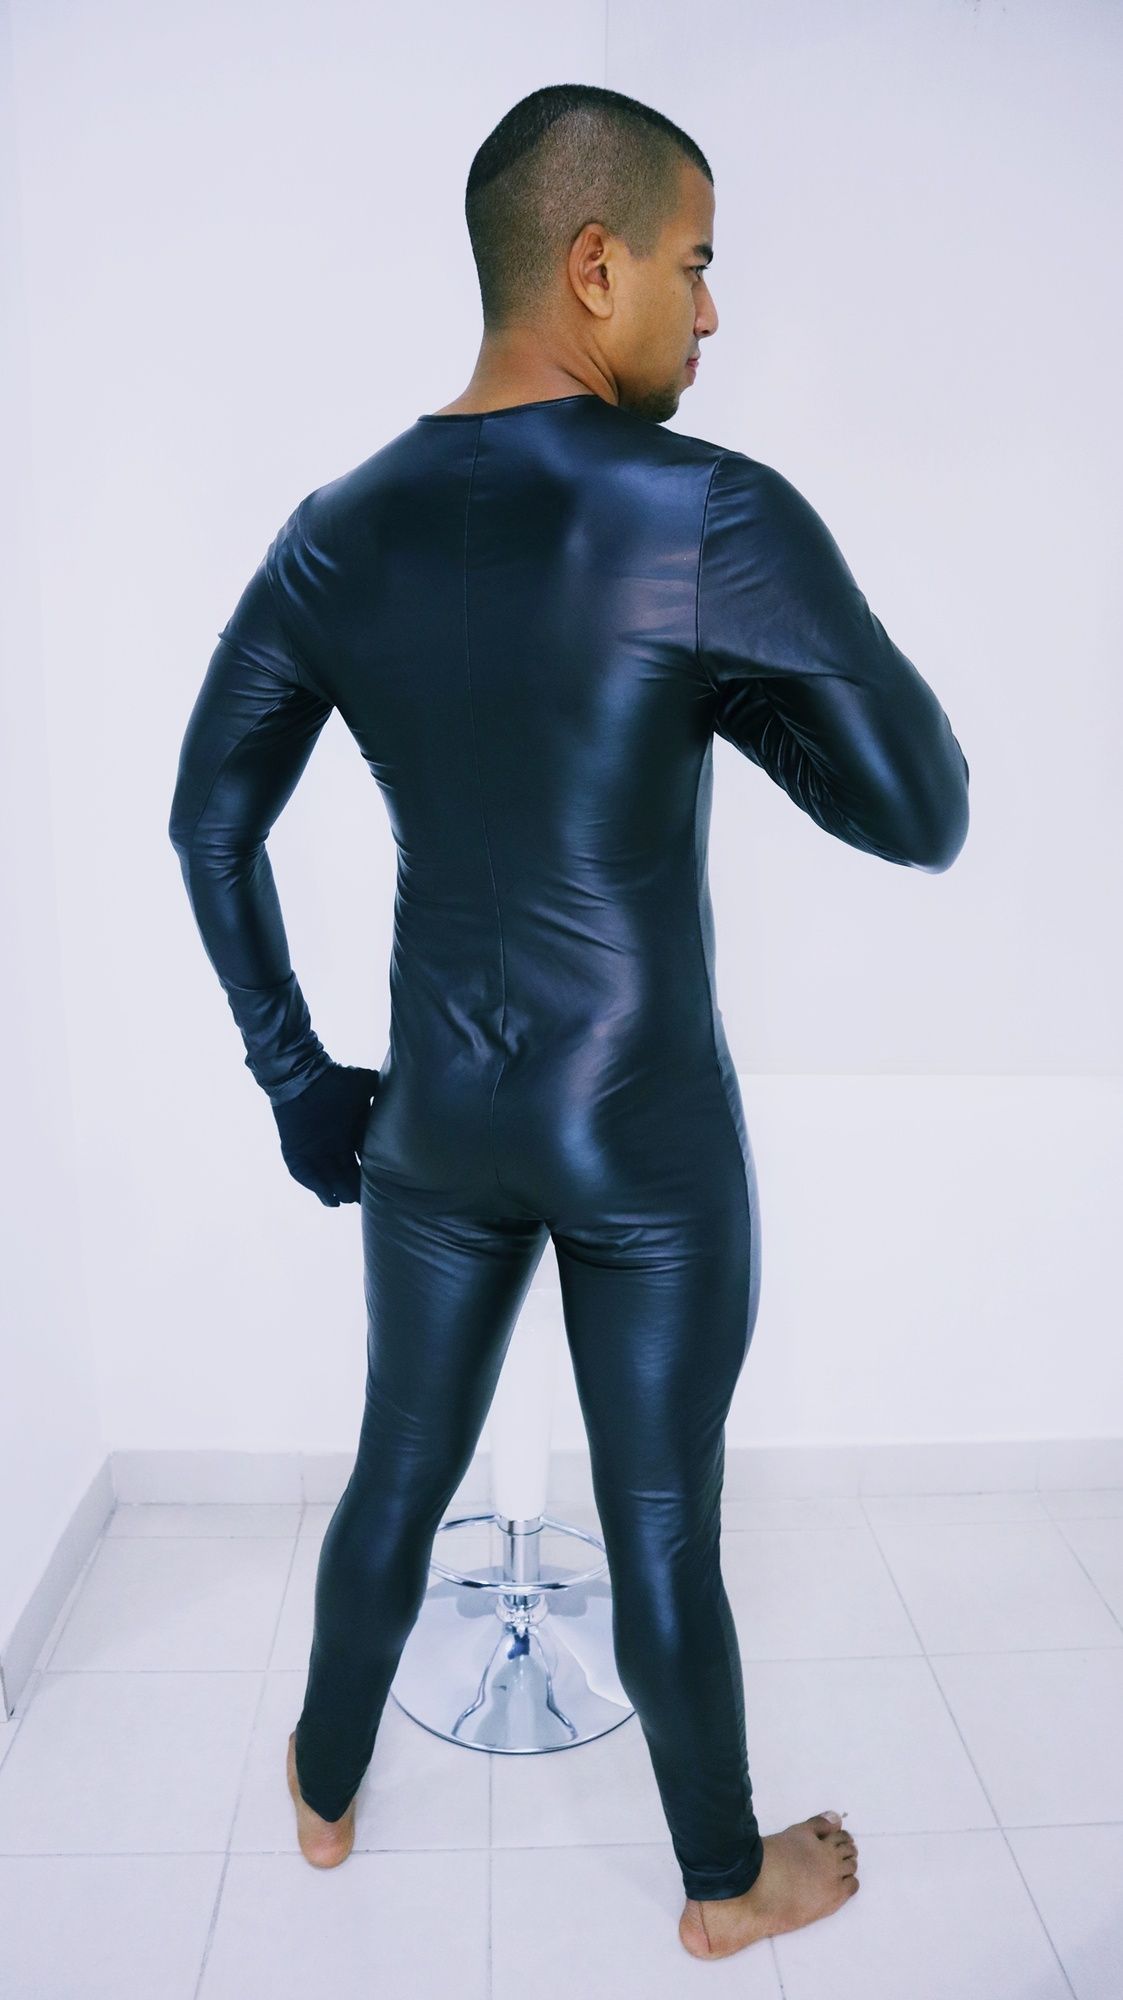 The rubber dom #6